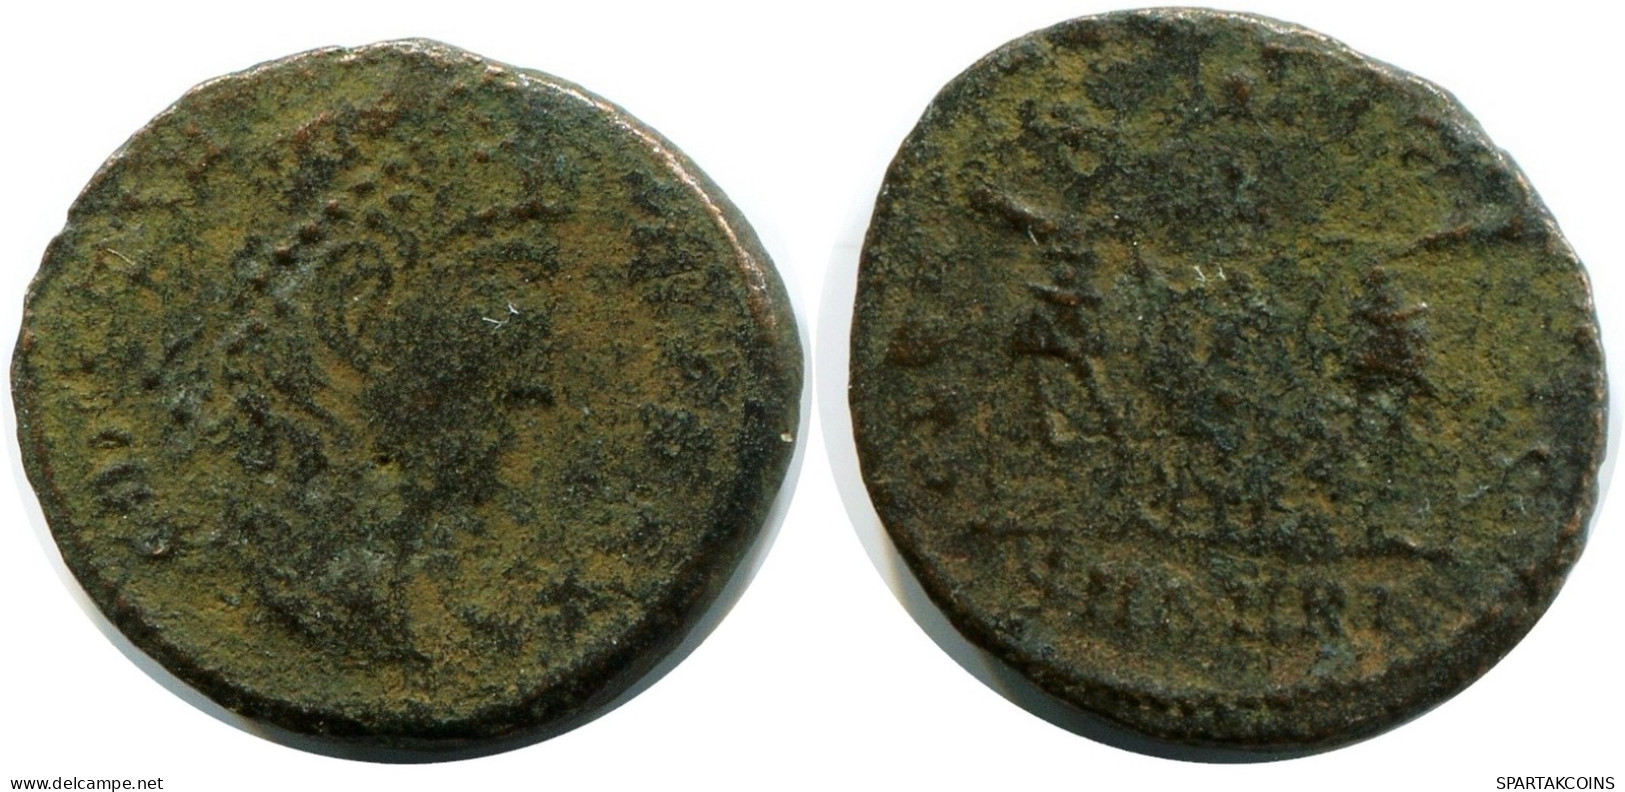 ROMAN Pièce MINTED IN ANTIOCH FROM THE ROYAL ONTARIO MUSEUM #ANC11275.14.F.A - The Christian Empire (307 AD Tot 363 AD)